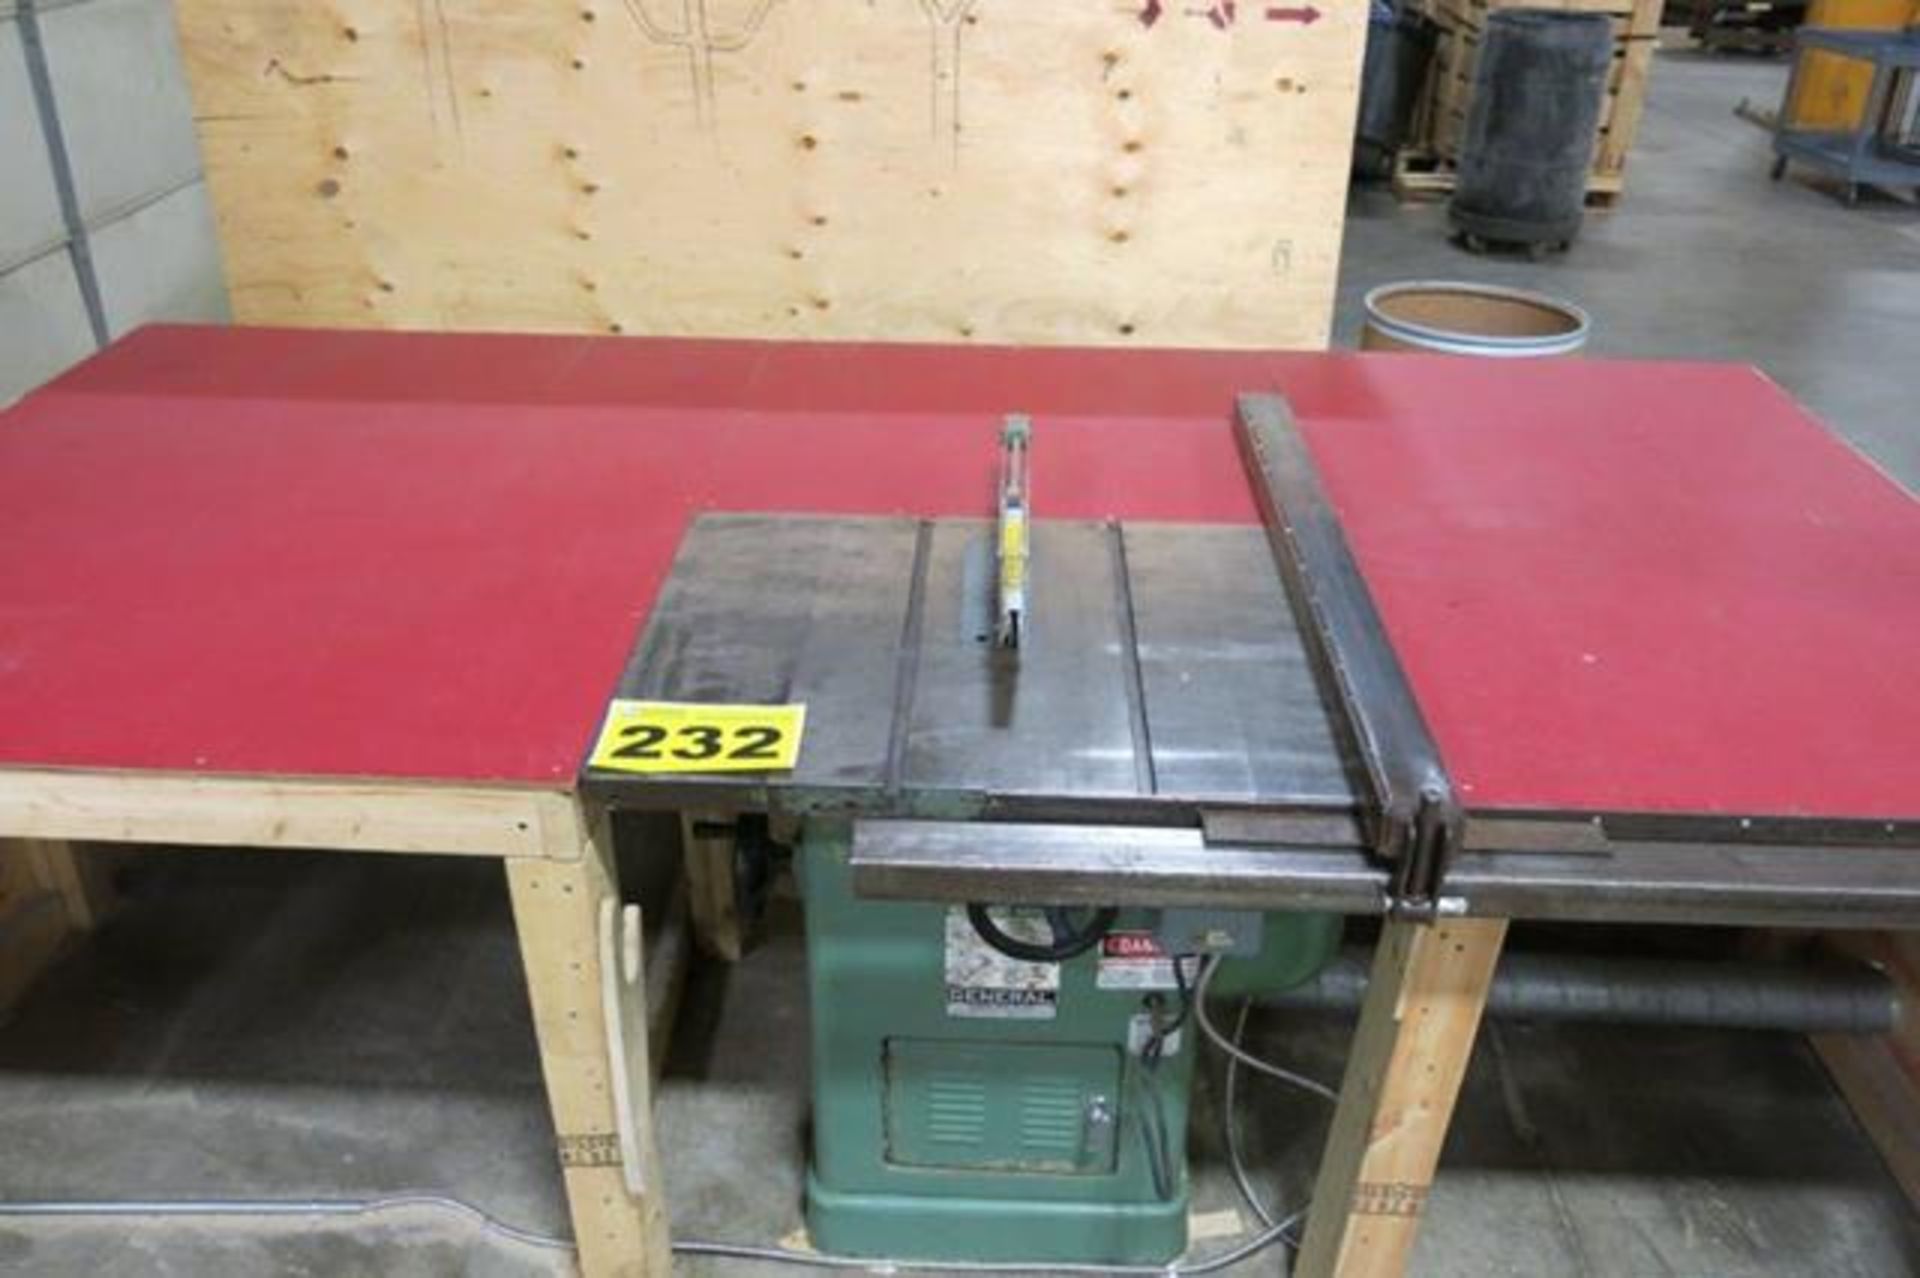 GENERAL, 350, TABLE SAW, S/N AD2714 WITH DUST COLLECTOR (RIGGING - $125)